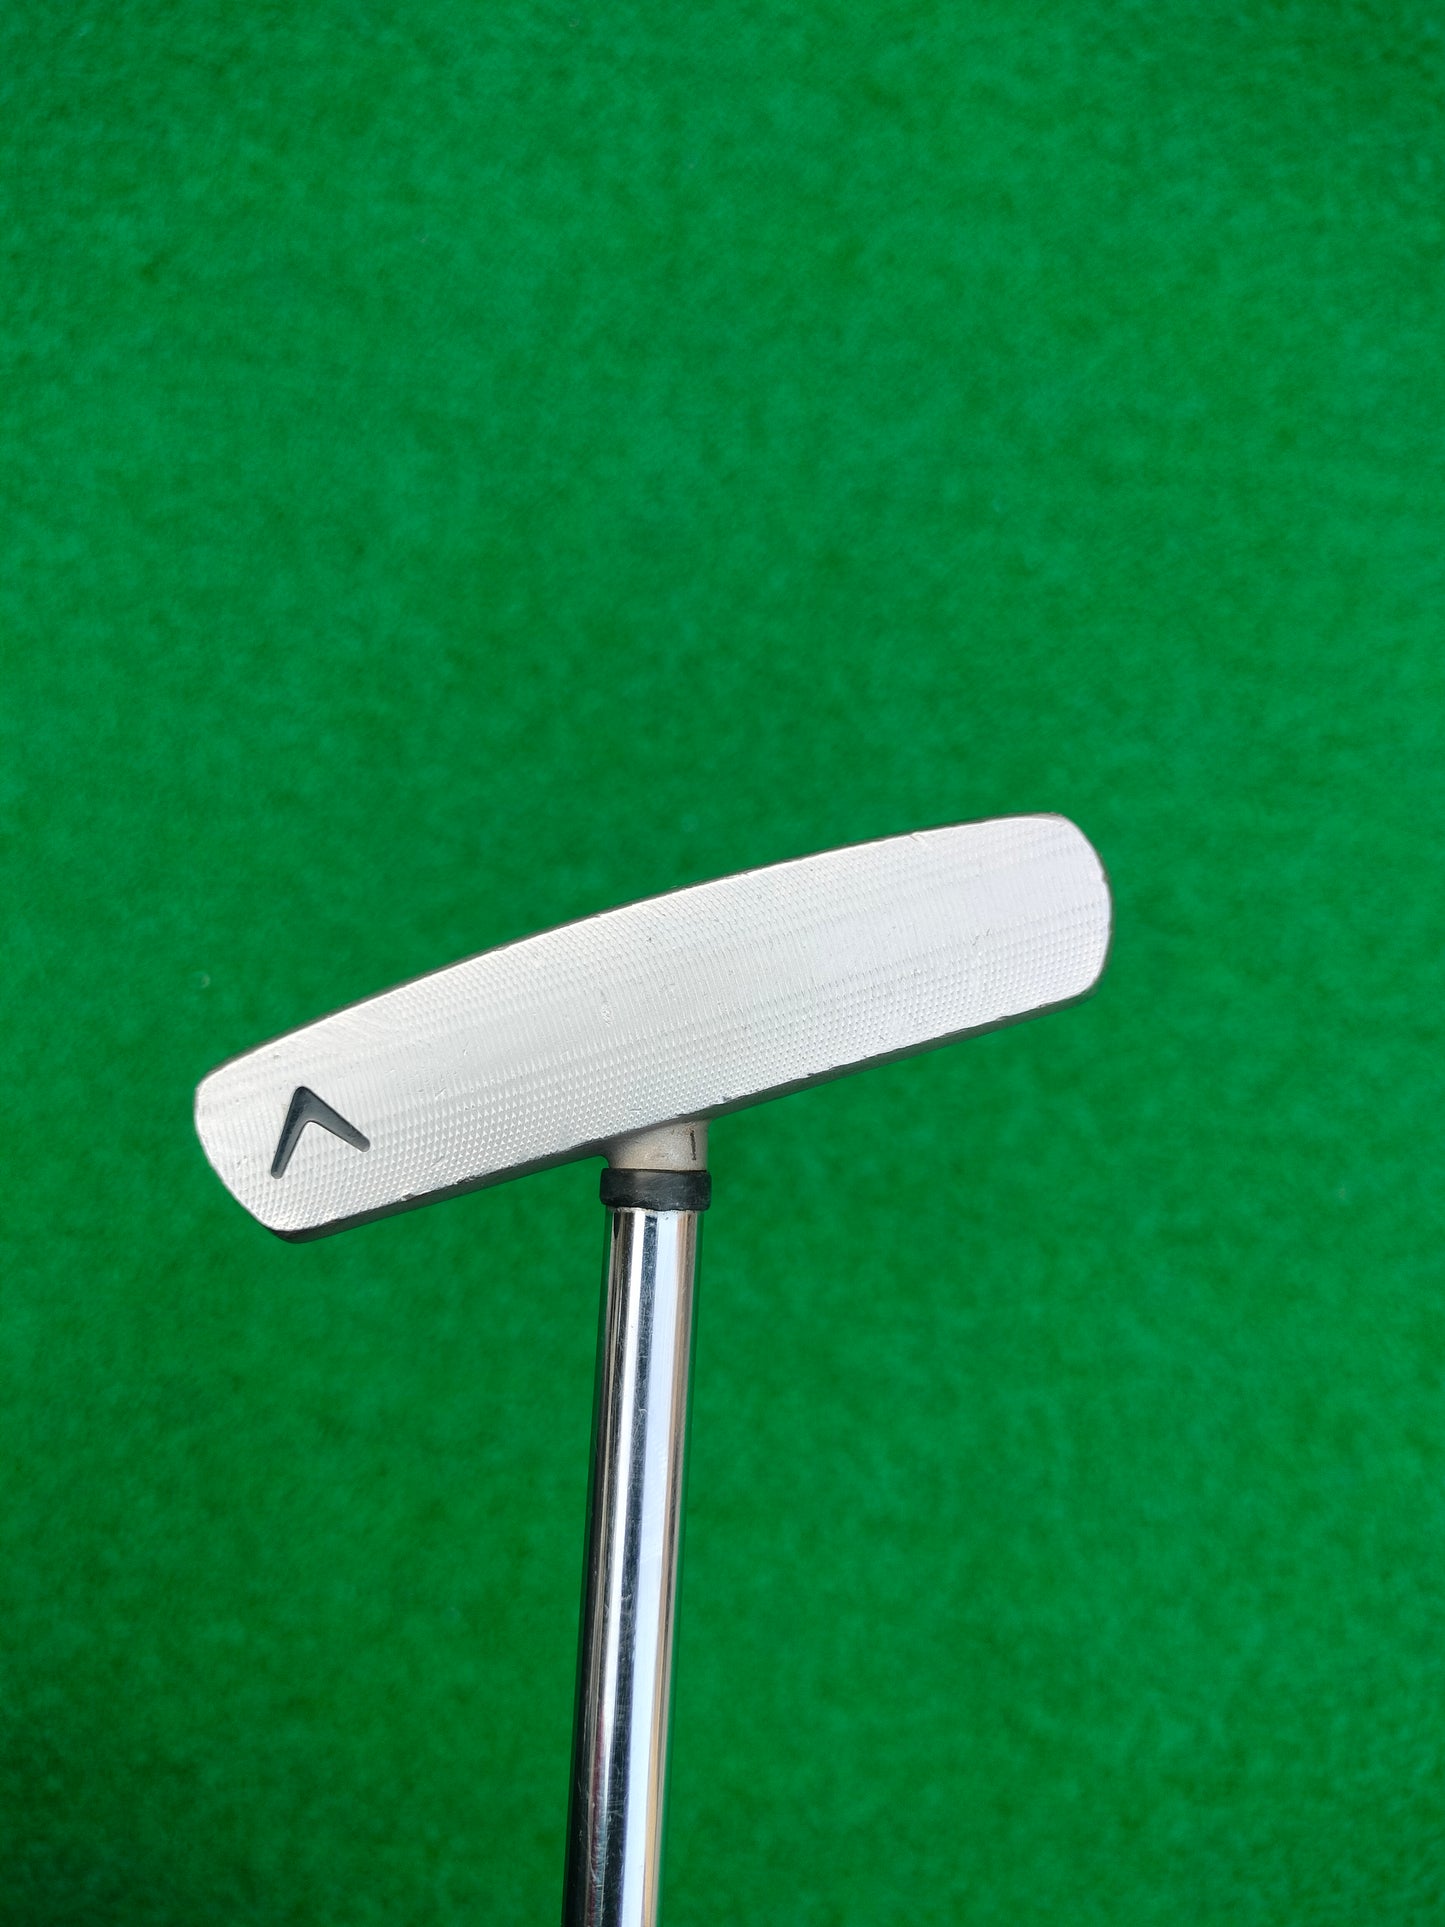 Callaway Solaire Putter